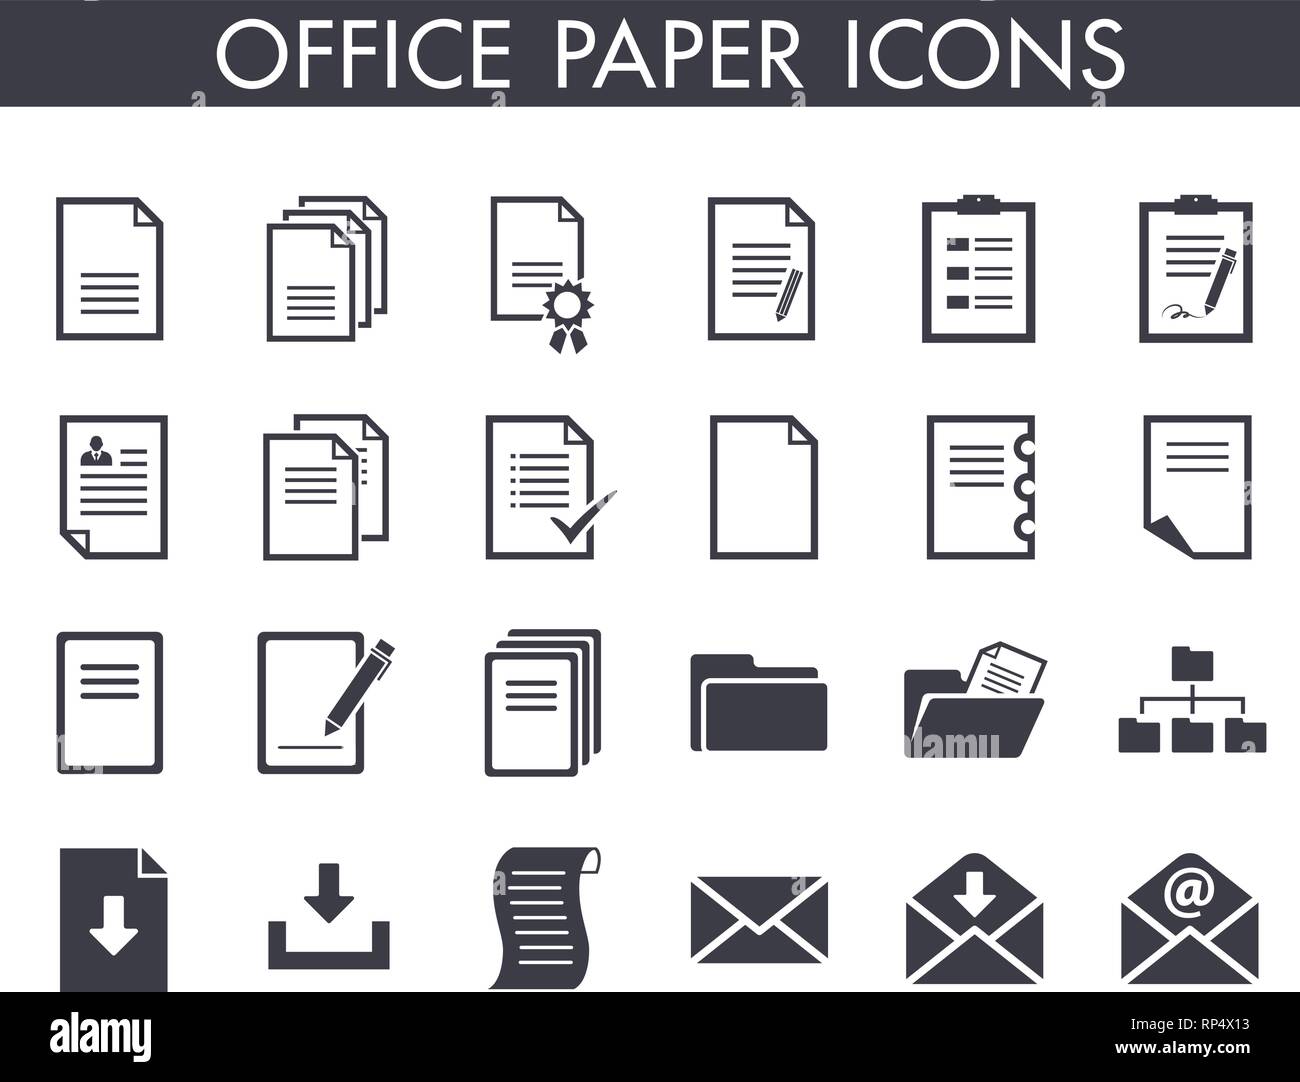 24 office paper and document icons Stock Vector